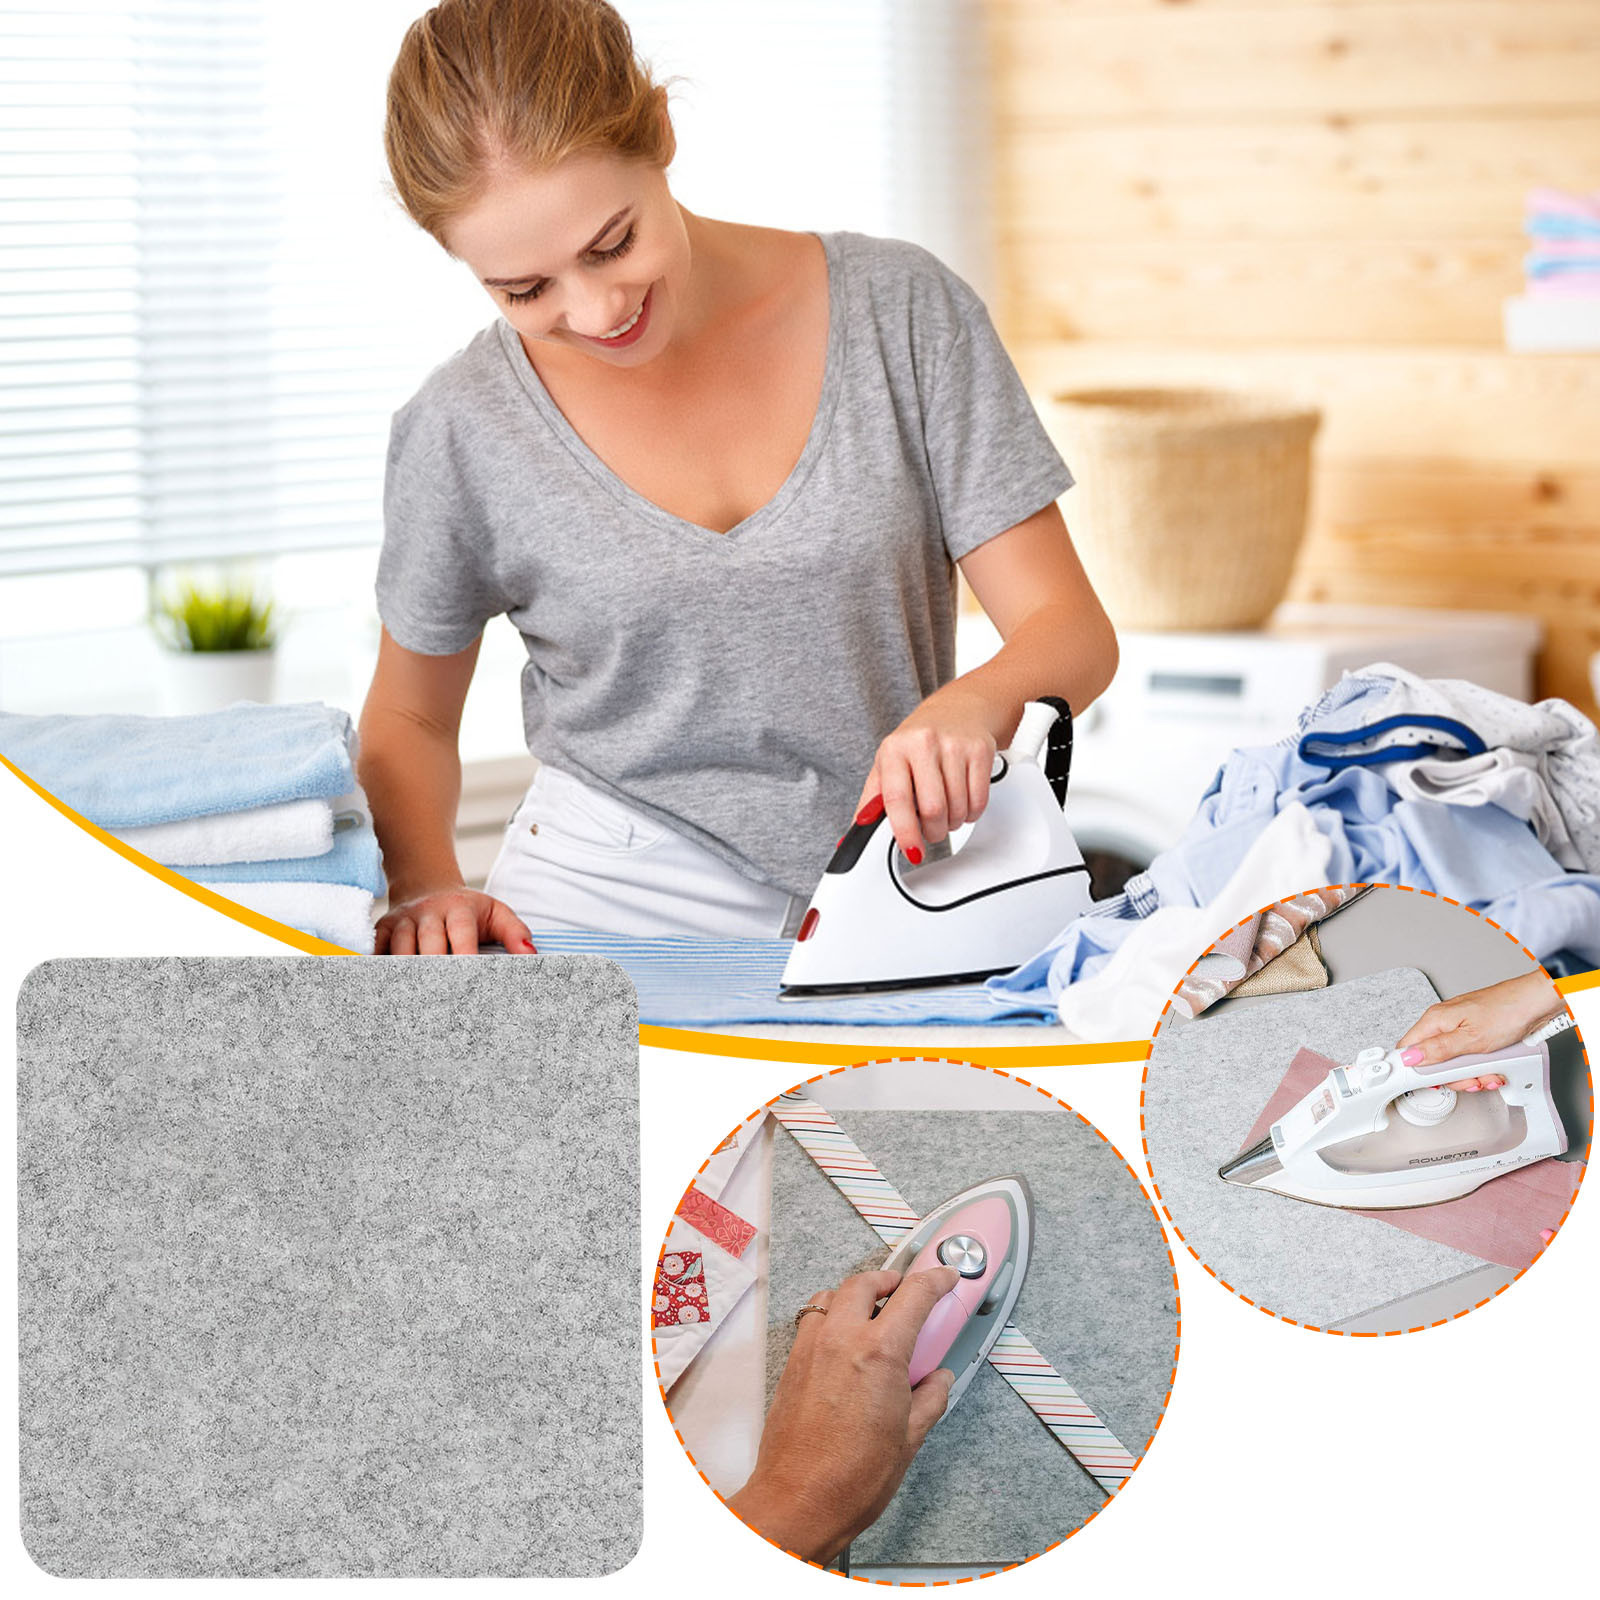 Kayannuo Clearance Wool Pressing Mat,Ironing Clothes Ironing